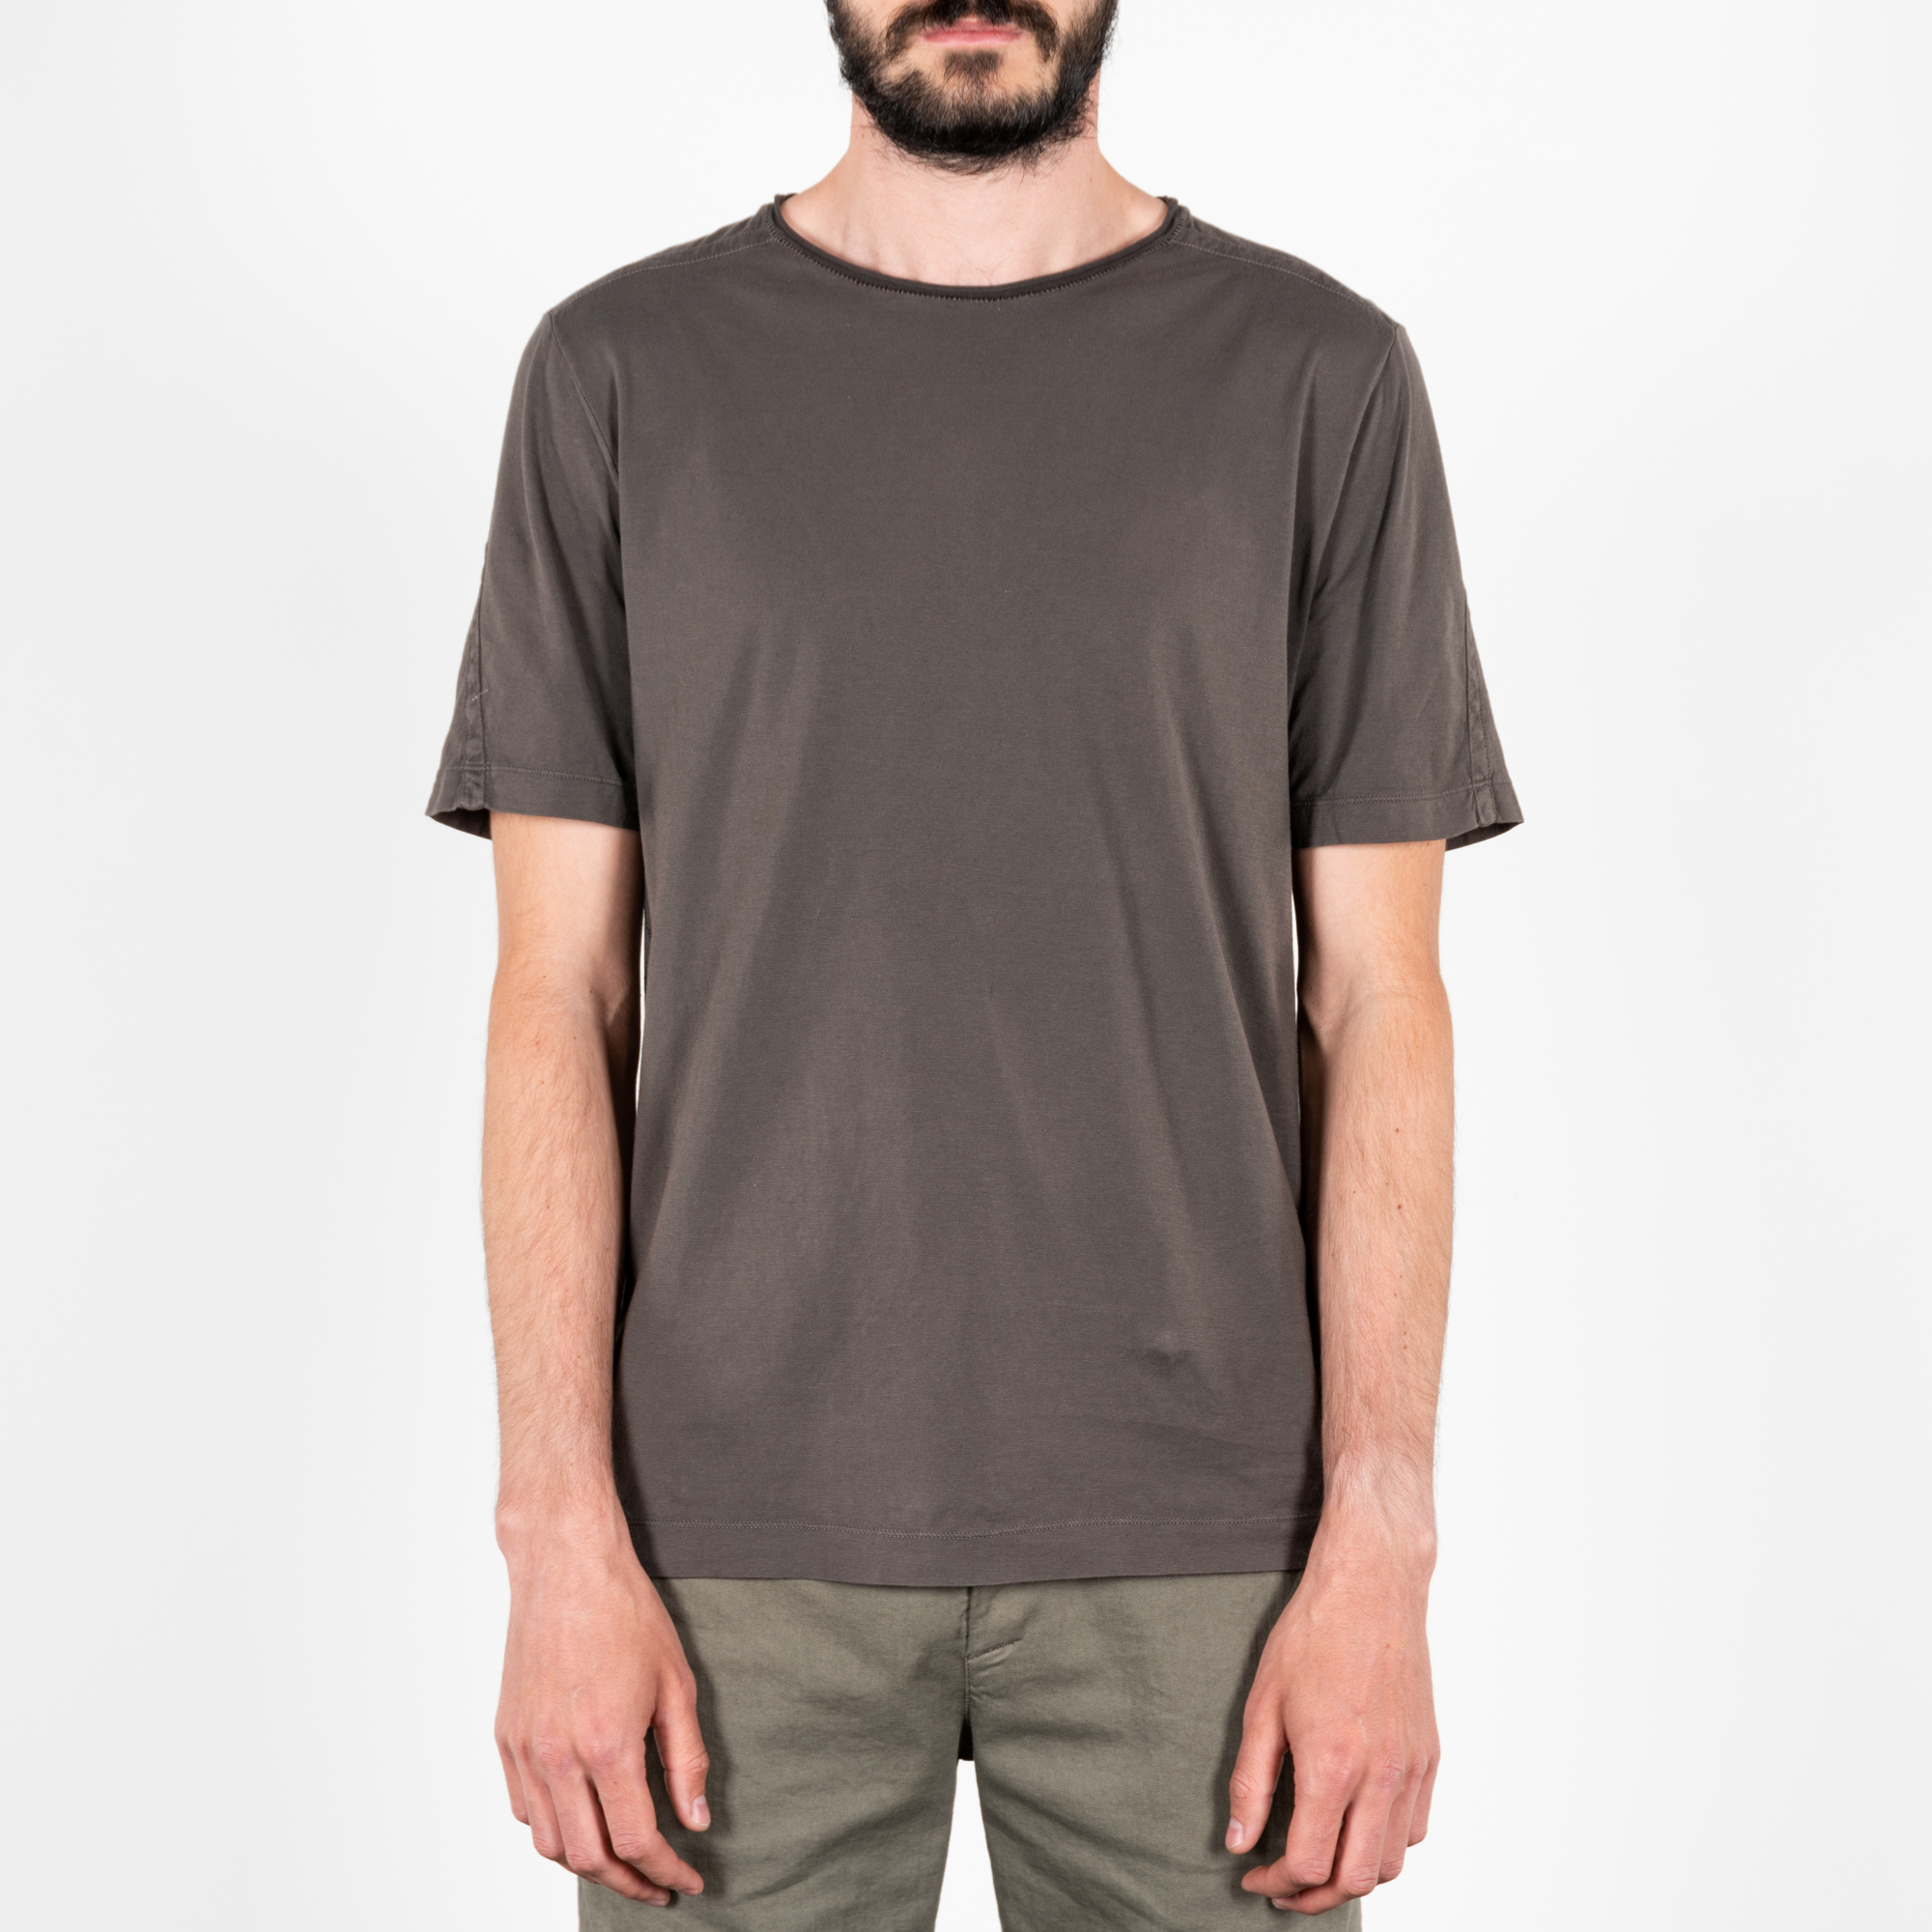 MUD-COLORED T-SHIRT|wolfensson